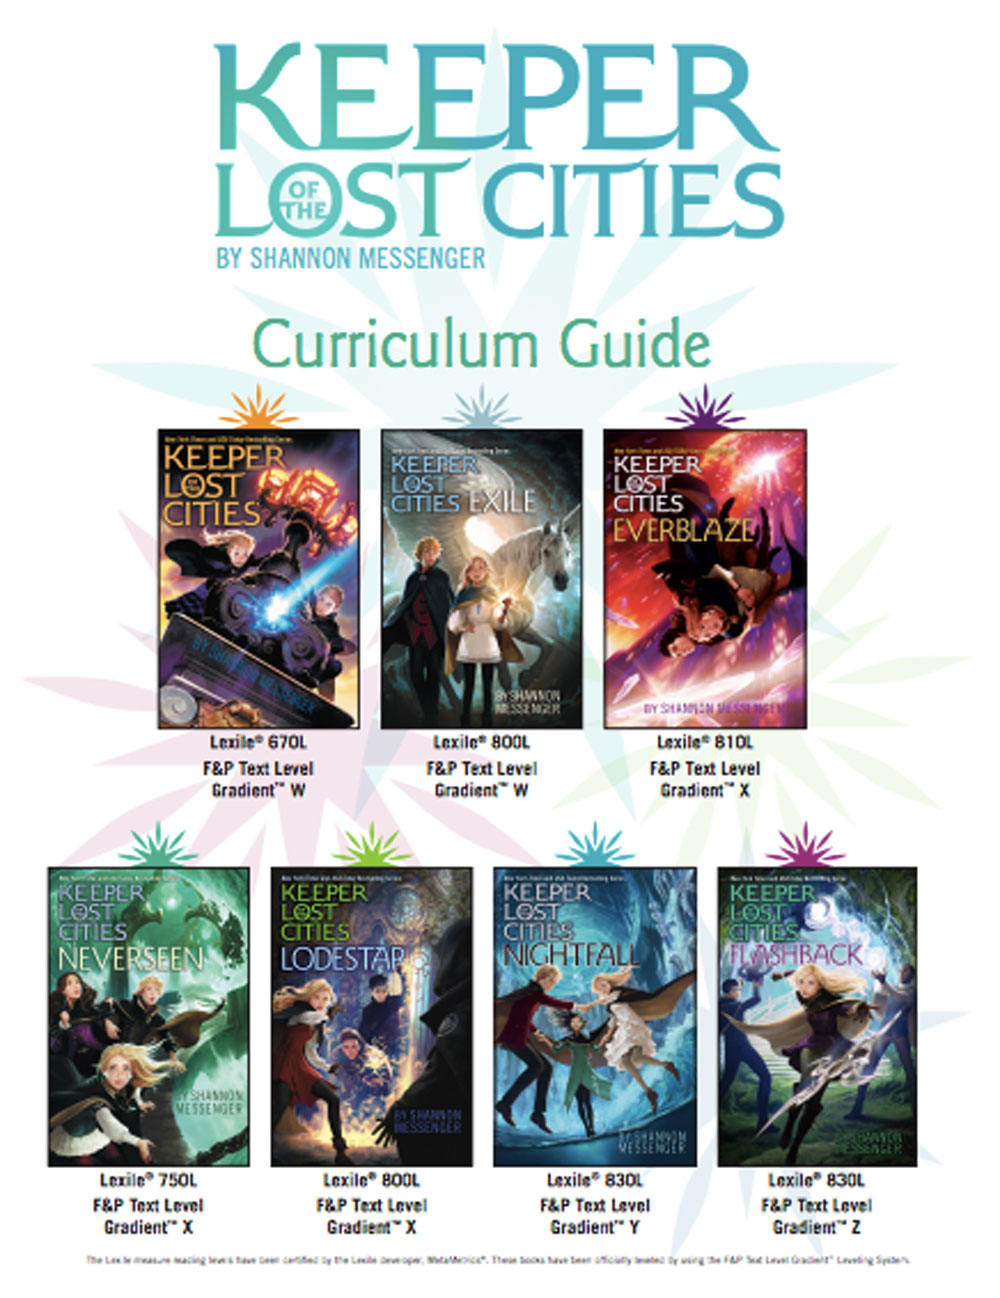 LOST iN City Guide – LOST iN City Guides